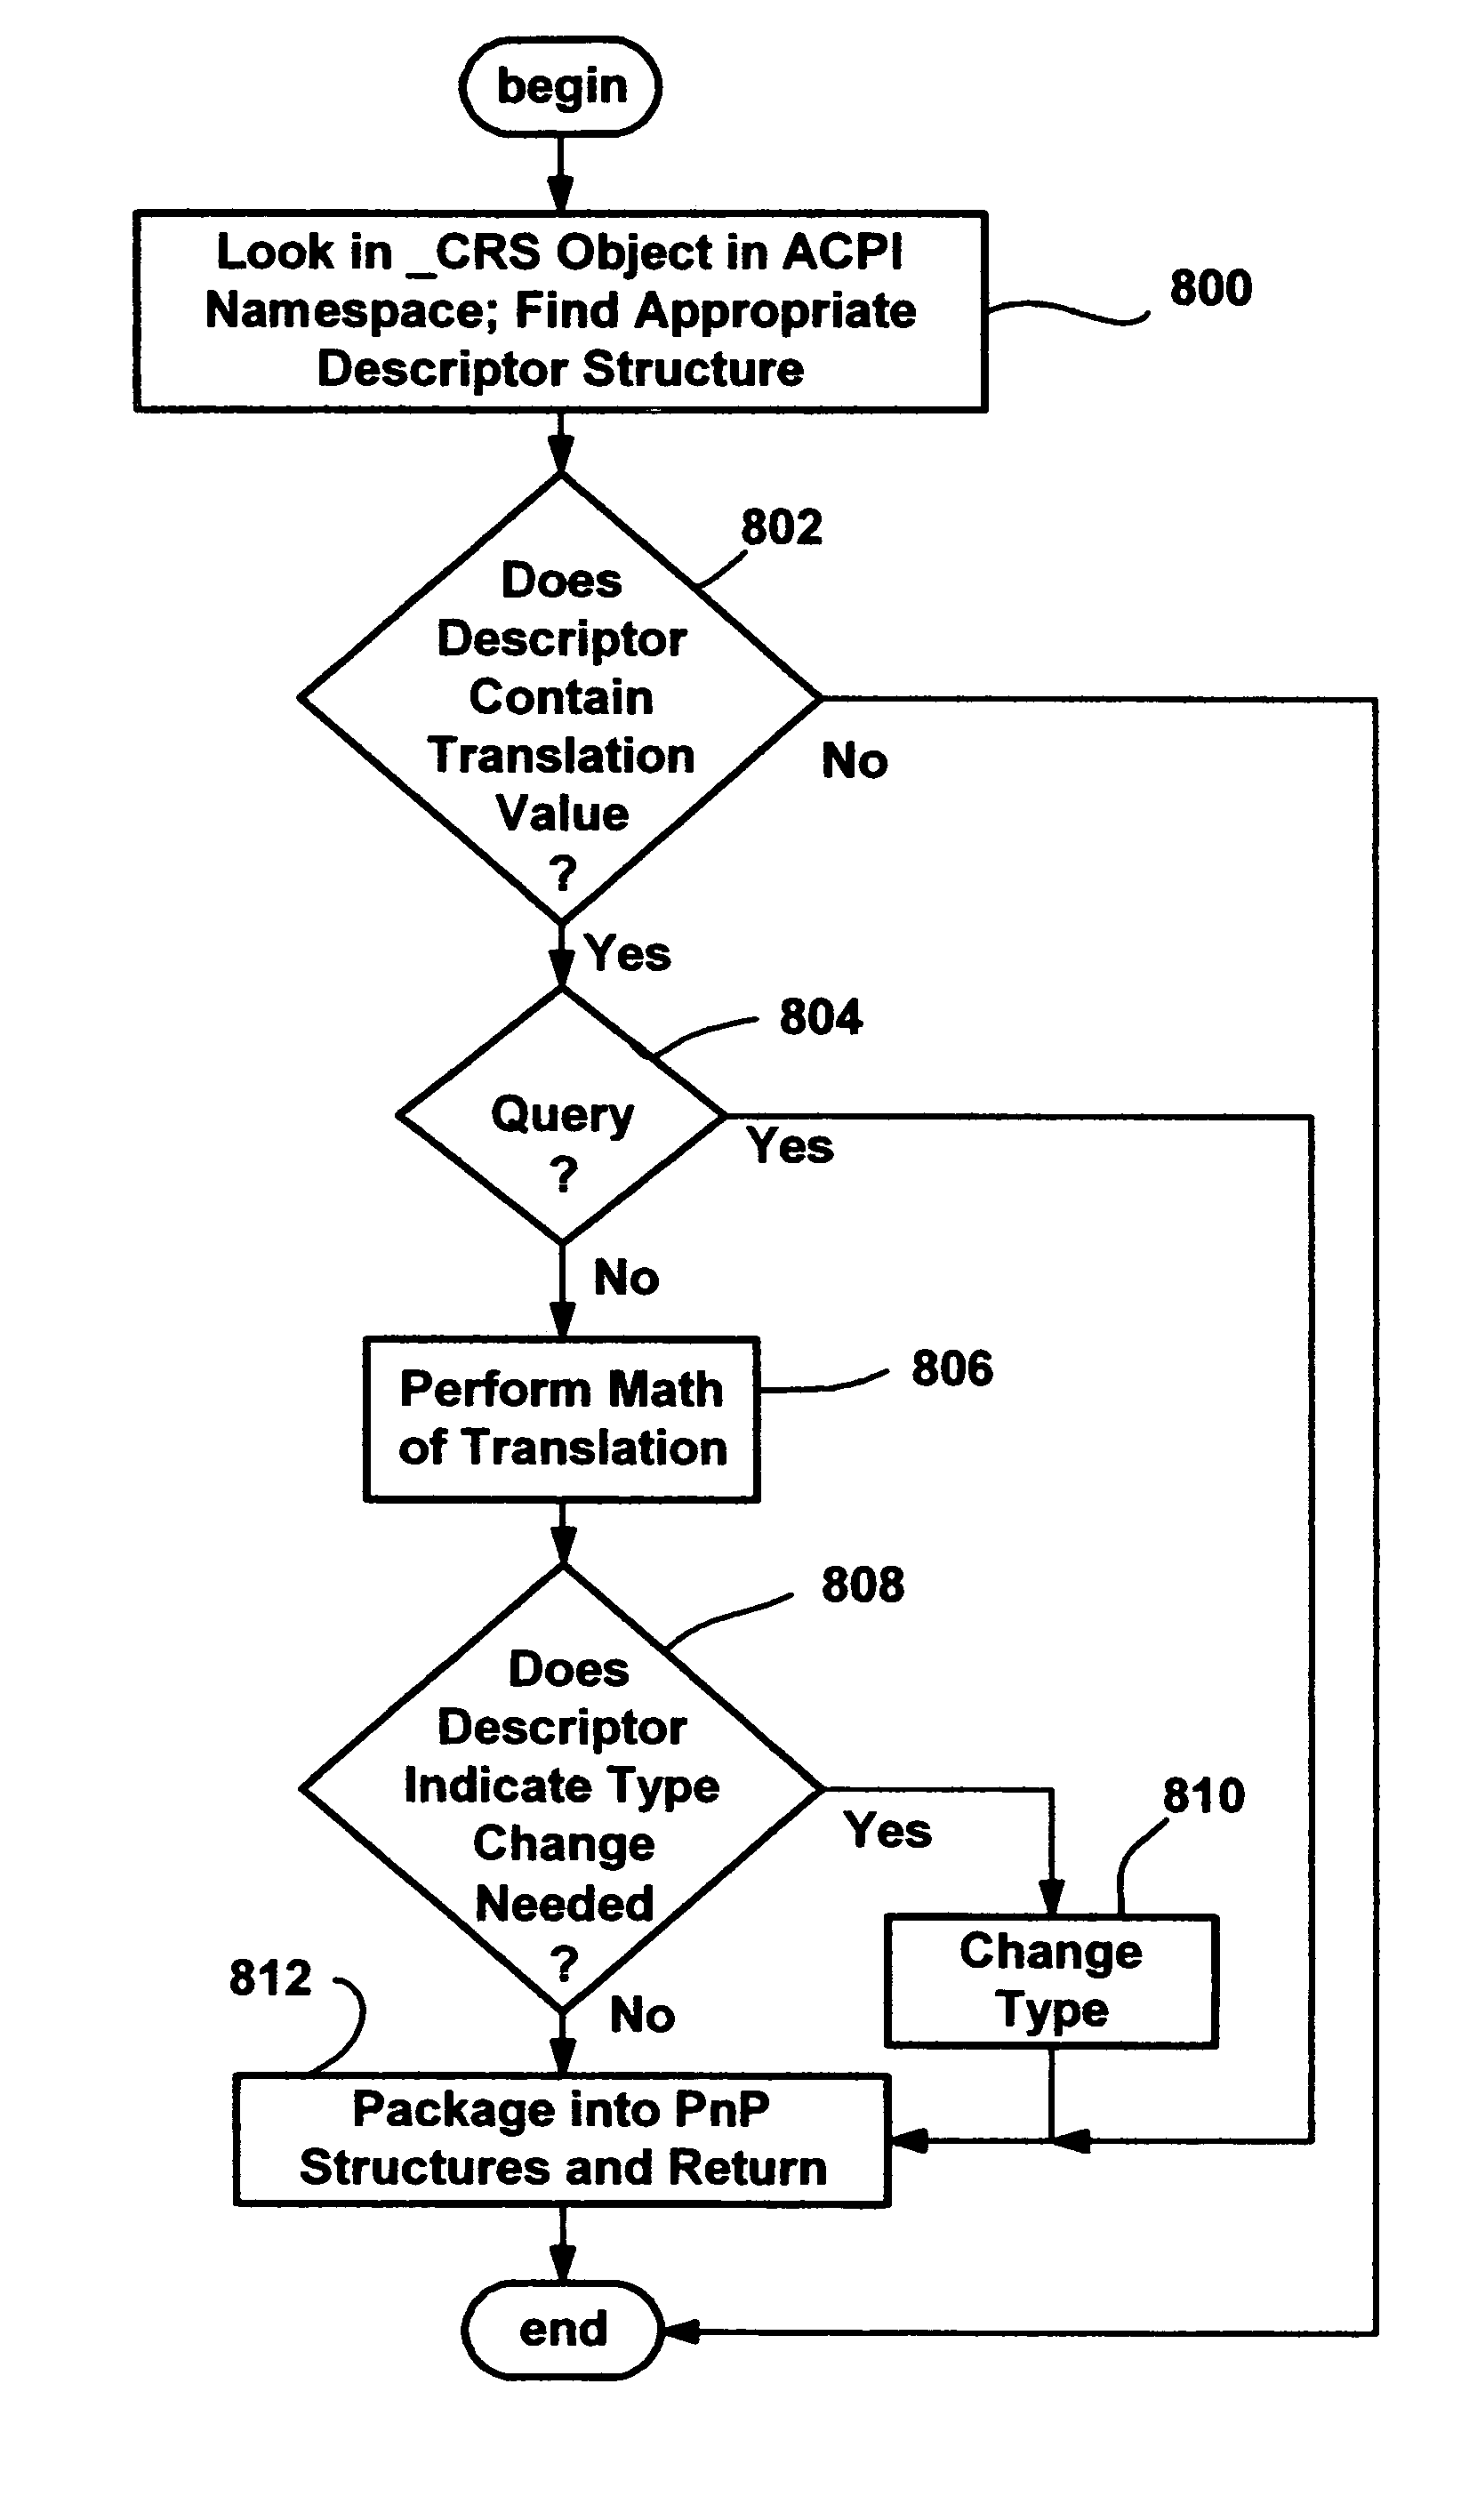 Dynamically configuring resources for cycle translation in a computer system